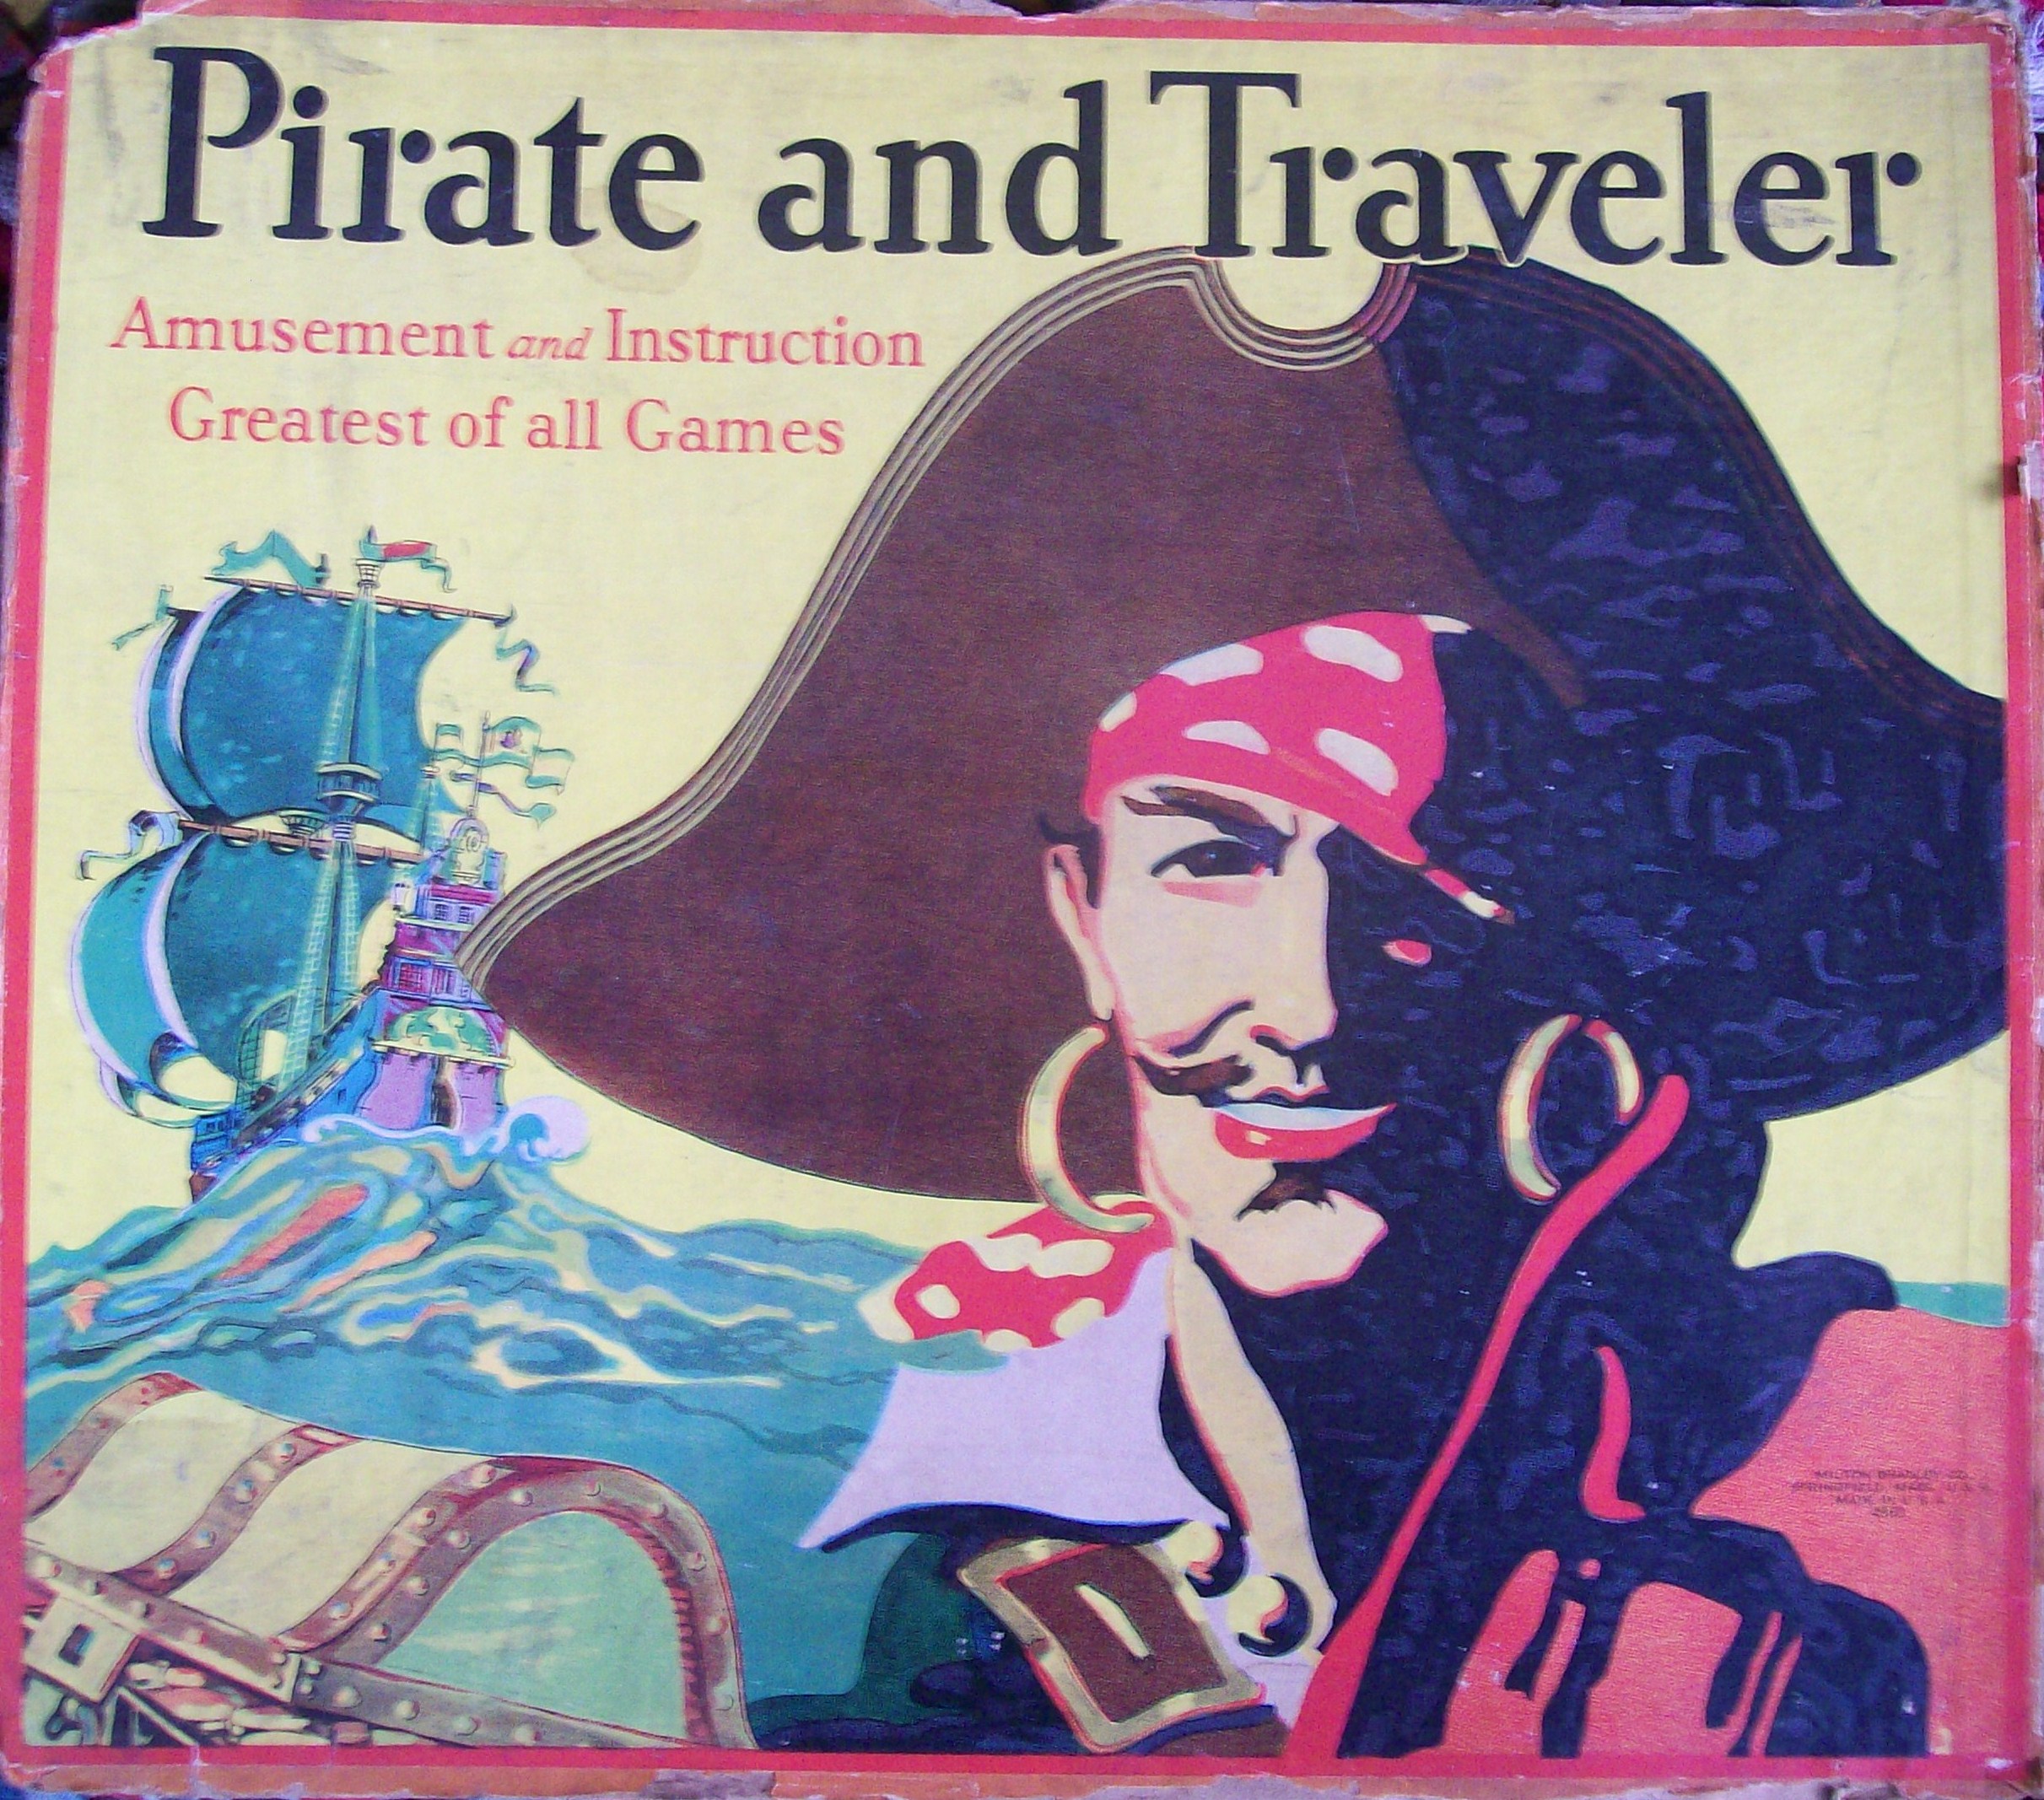 Vintage Board Game of Pirate and Traveler